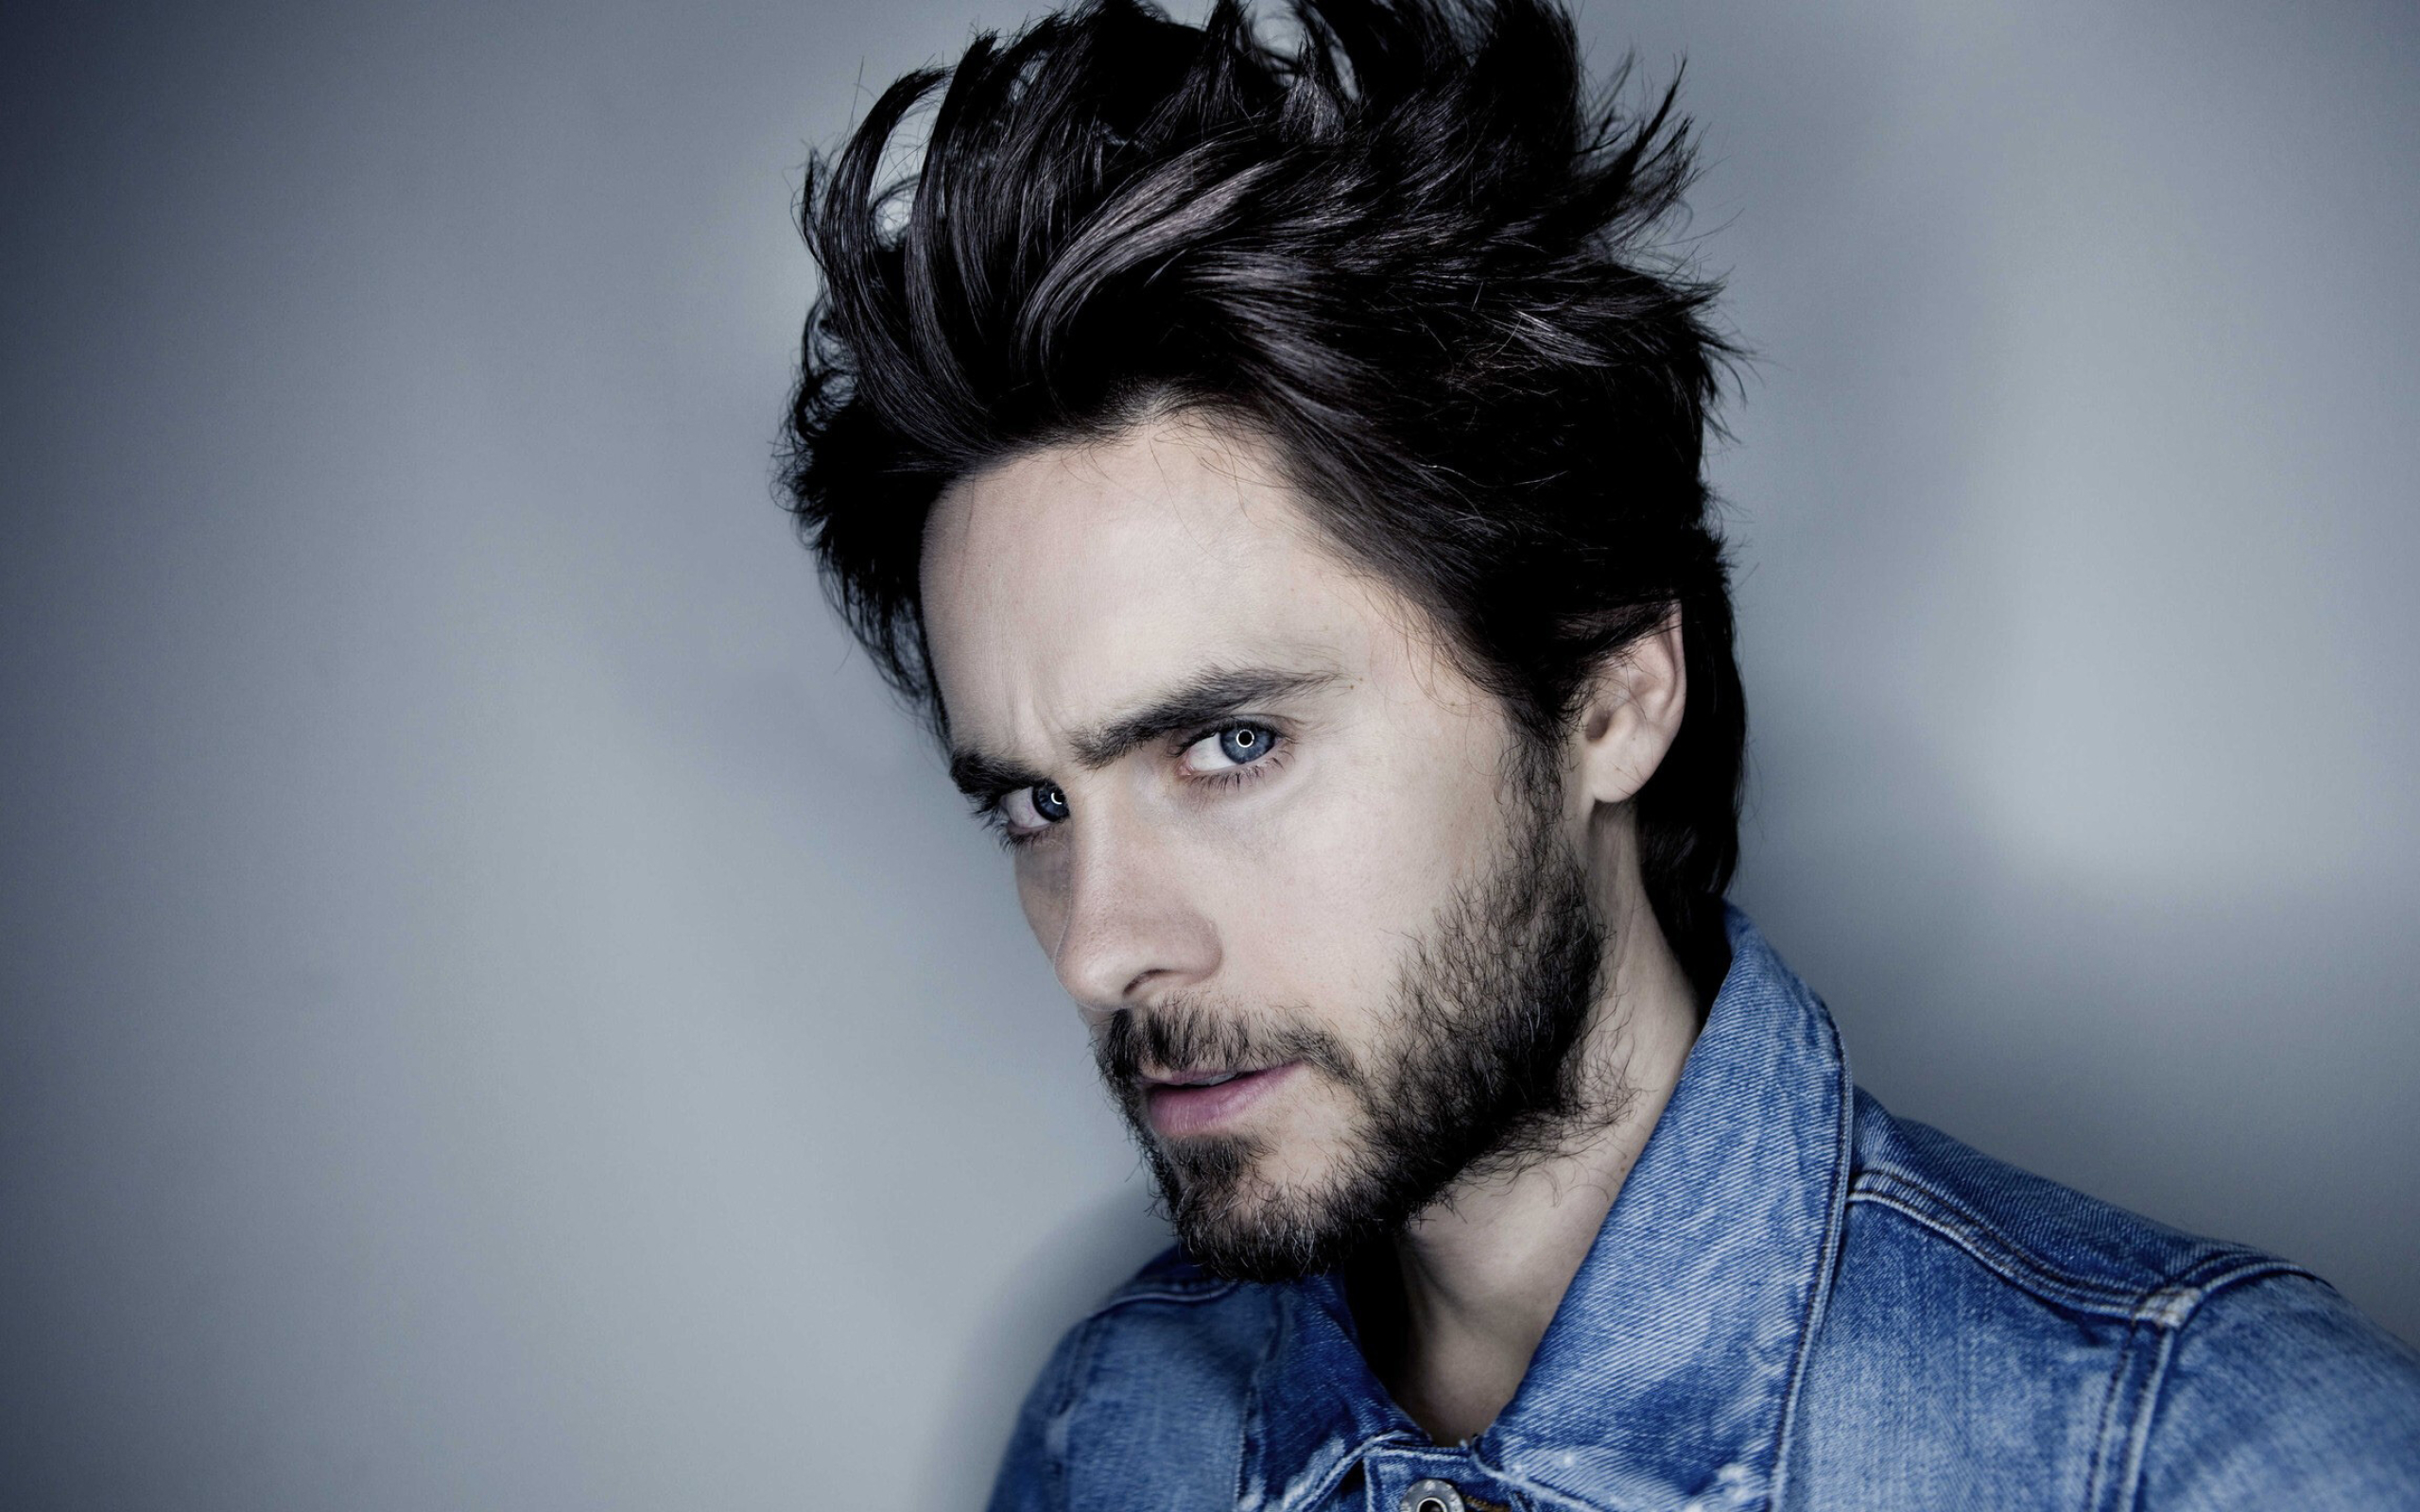 Jared Leto, Male celebrity wallpapers, Handsome charm, Hollywood style, 2560x1600 HD Desktop